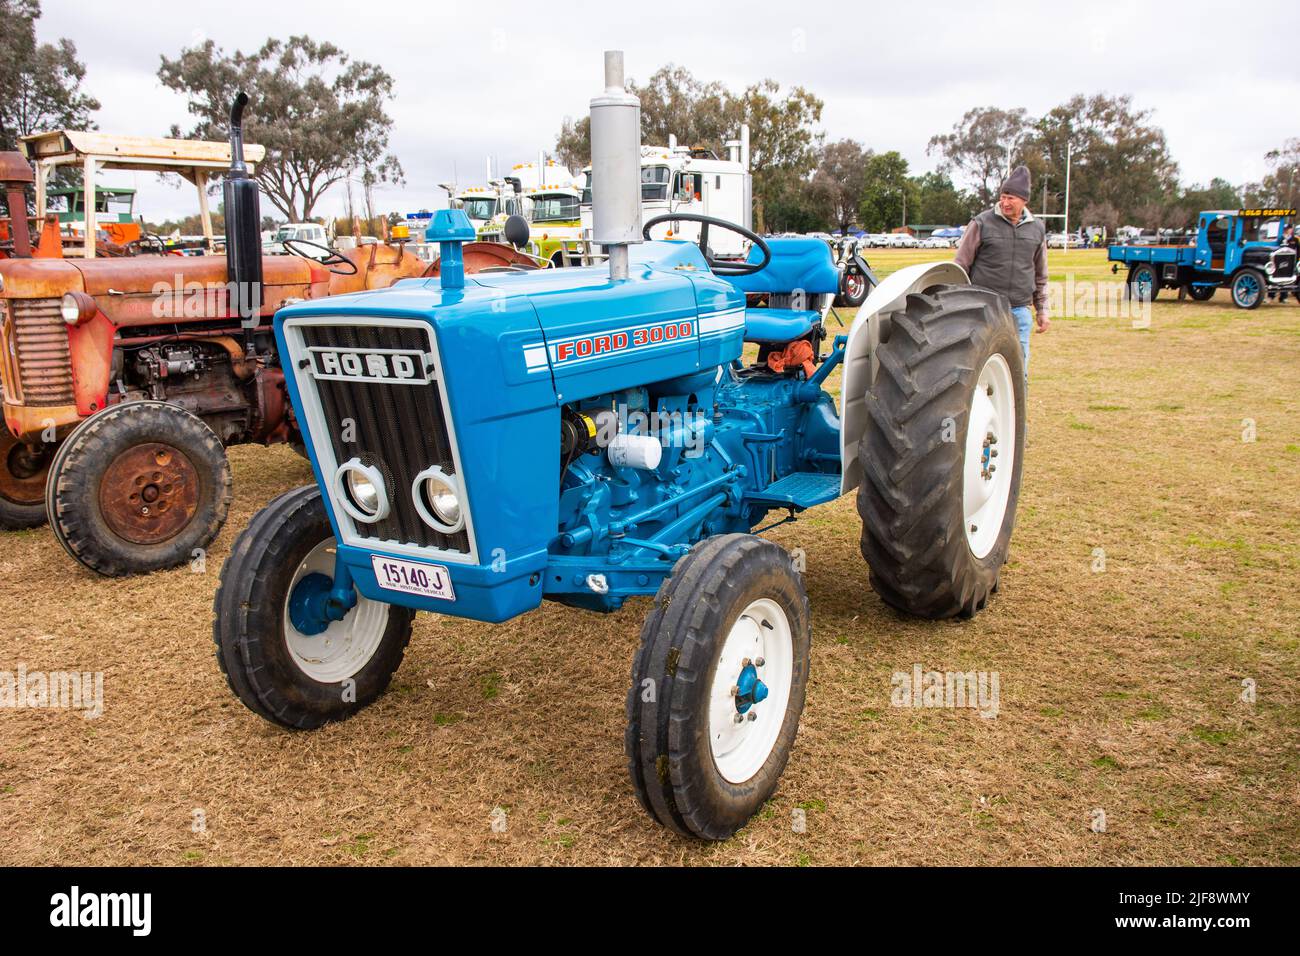 A Well Restored Vintage Ford 3000 farm Tractor on display at Manilla Australia. Stock Photo